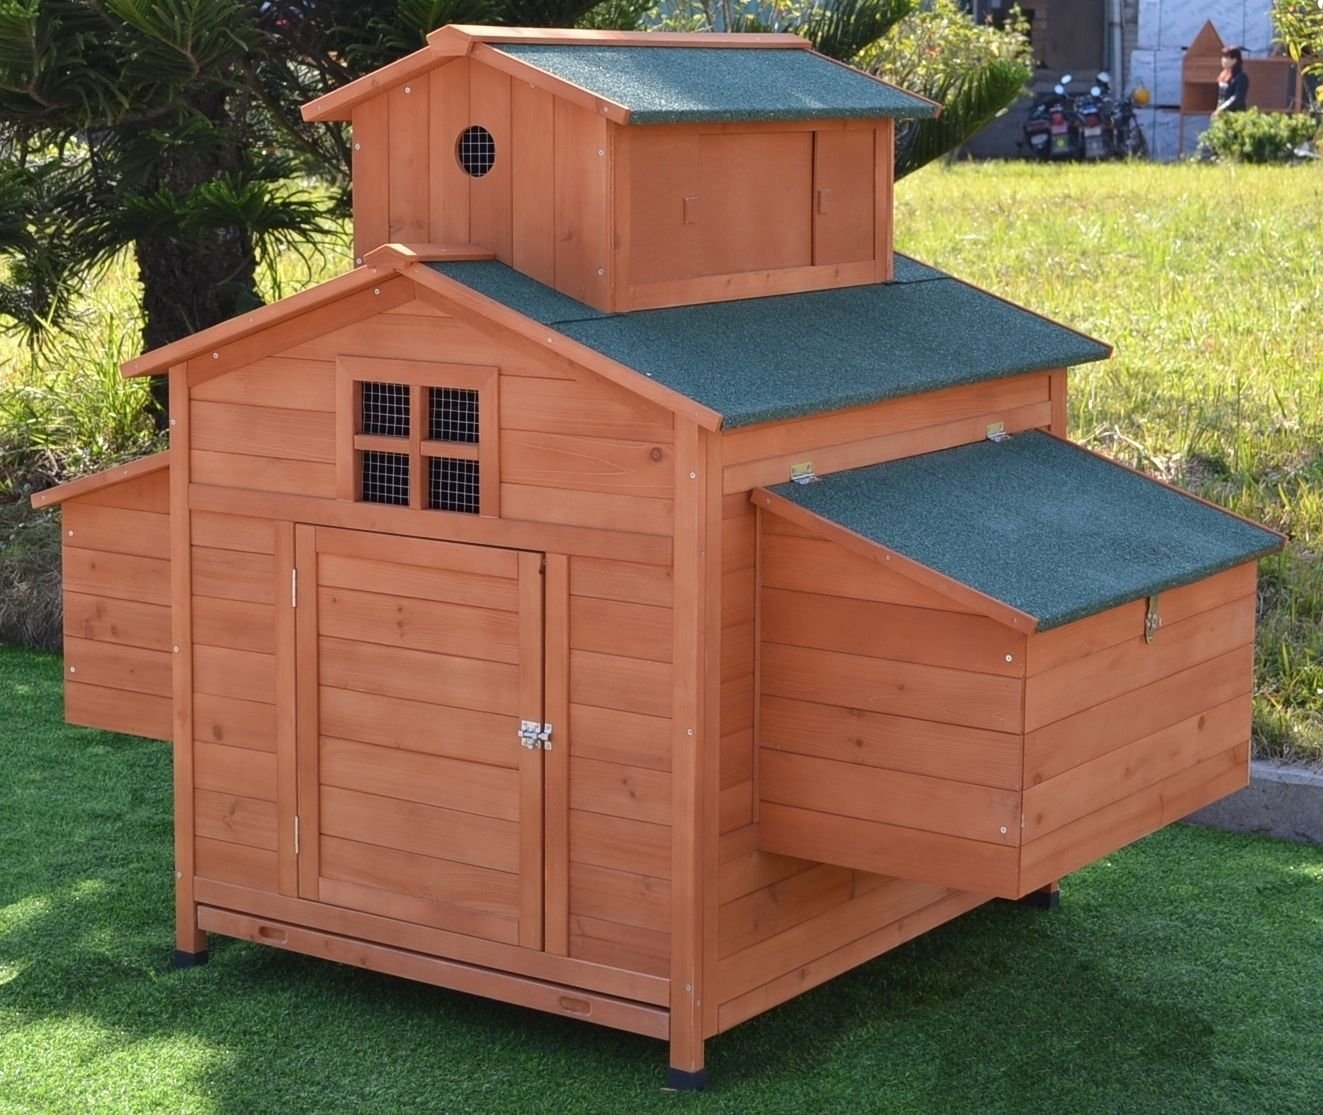 New 64" Large Wood Chicken Coop Backyard Hen House 4-6 Chickens w 4 nesting box 